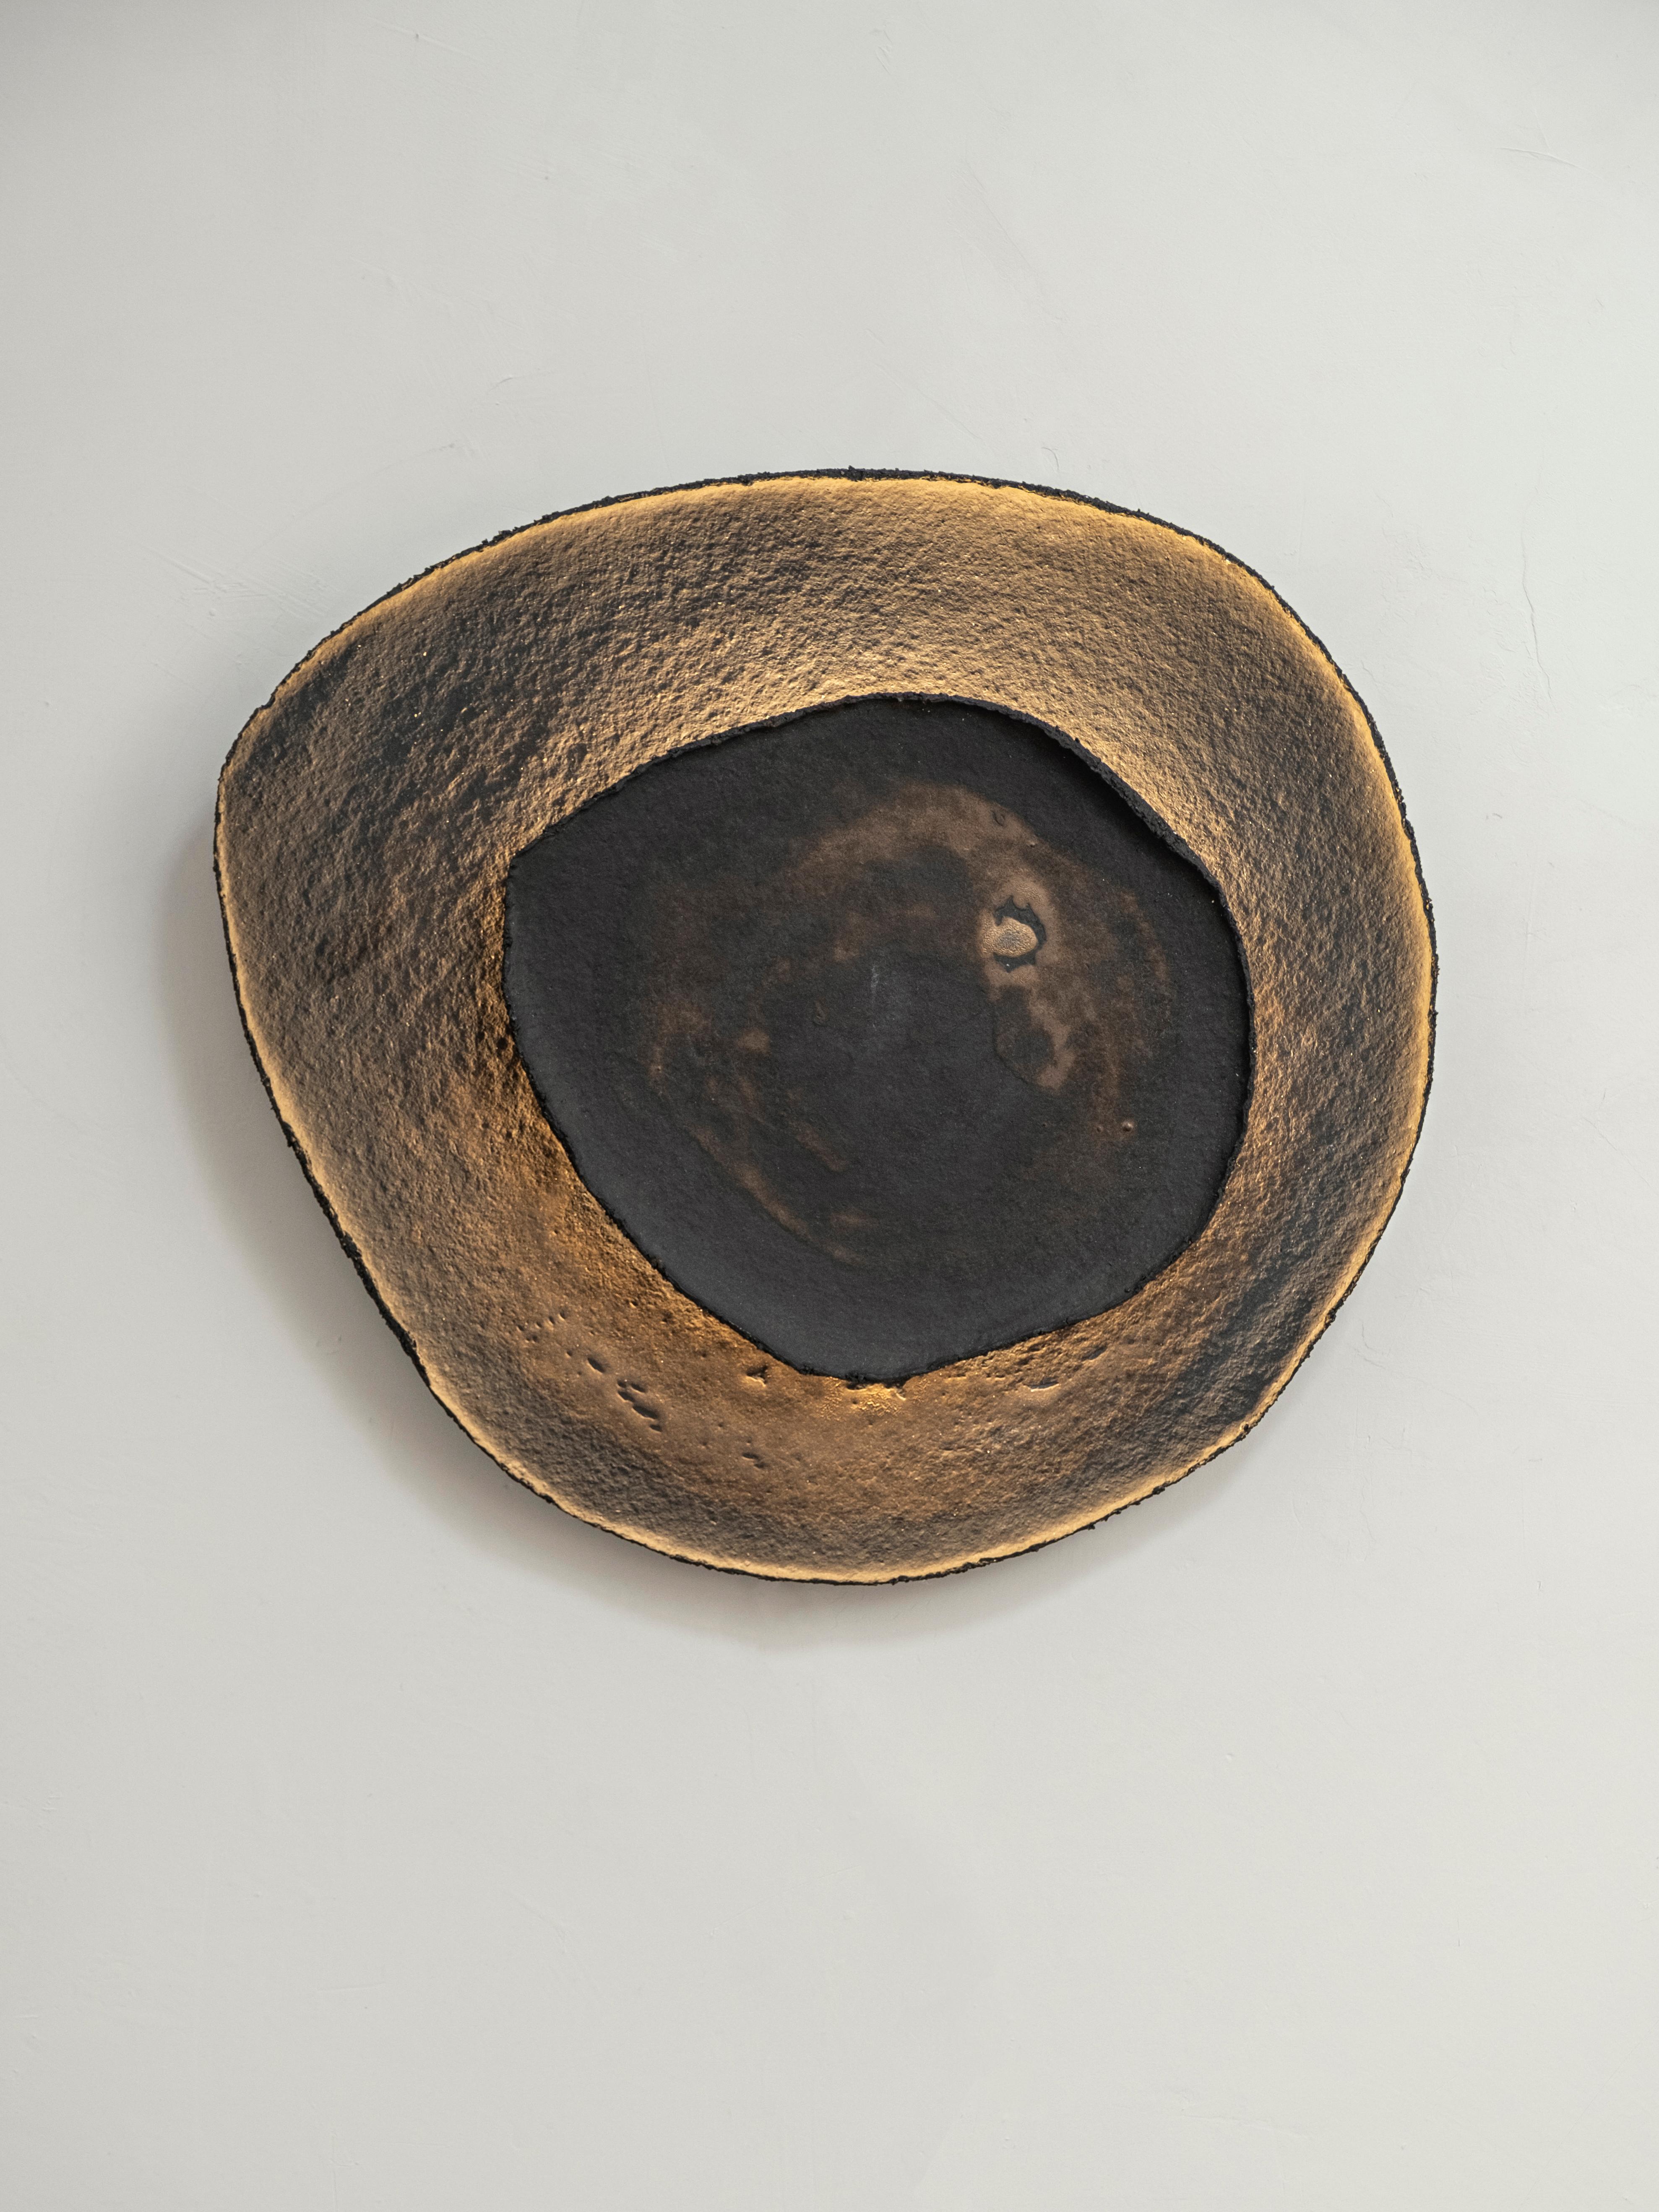 Ash #11 wall light by Margaux Leycuras
One of a Kind, Signed and numbered
Dimensions: Ø44 x H48 cm.
Material: Ceramic, black stoneware with burnished gold glaze.
The piece is signed, numbered and delivered with a certificate of